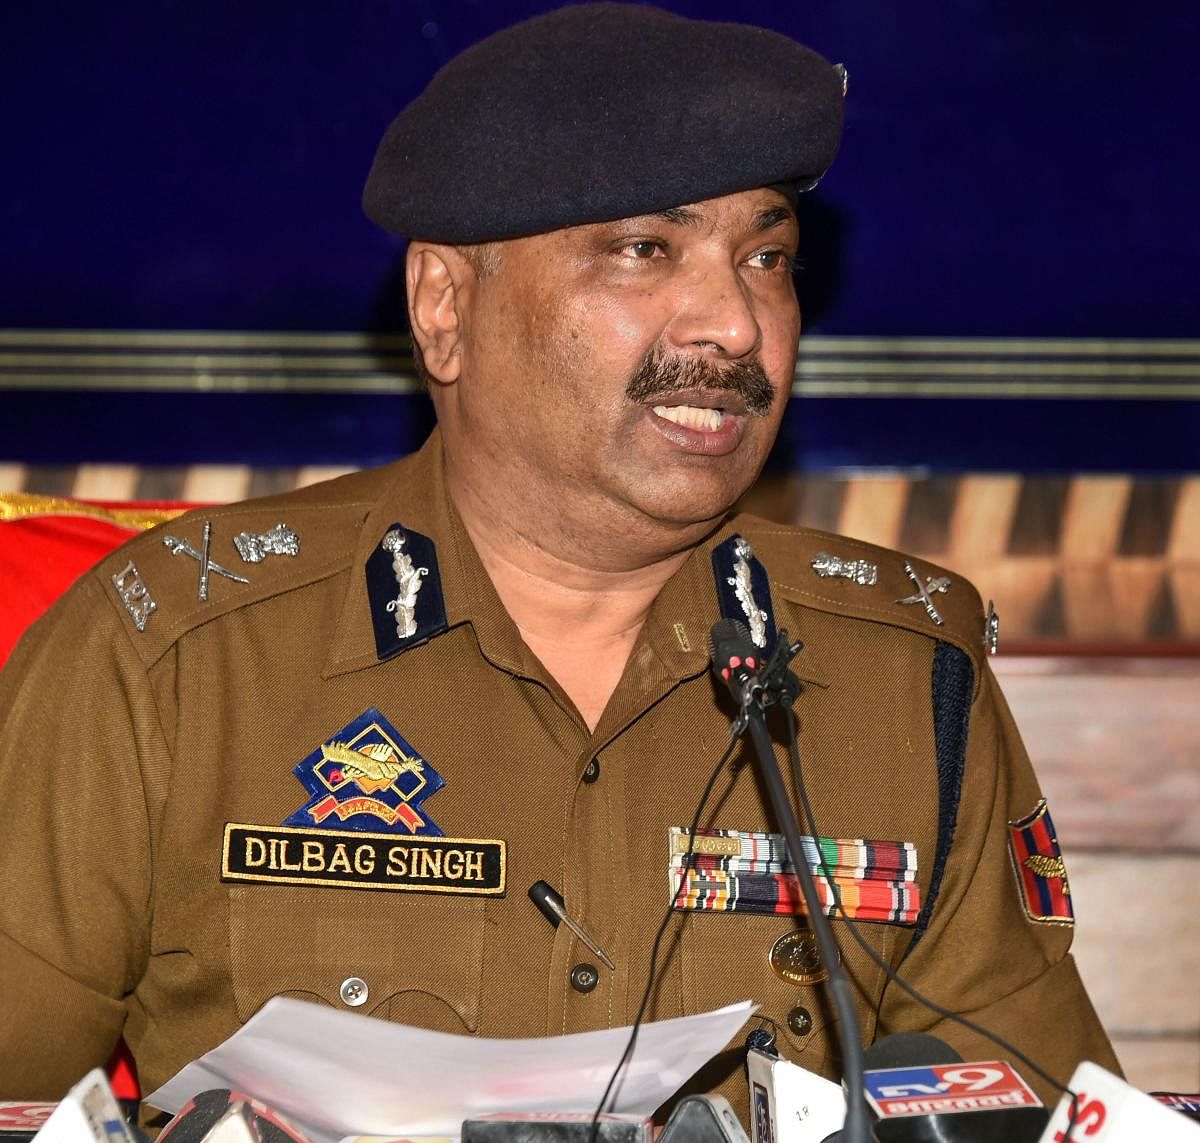 The DGP said the scrapping of Article 370 was the biggest challenge faced by his force in 2019. PTI file photo